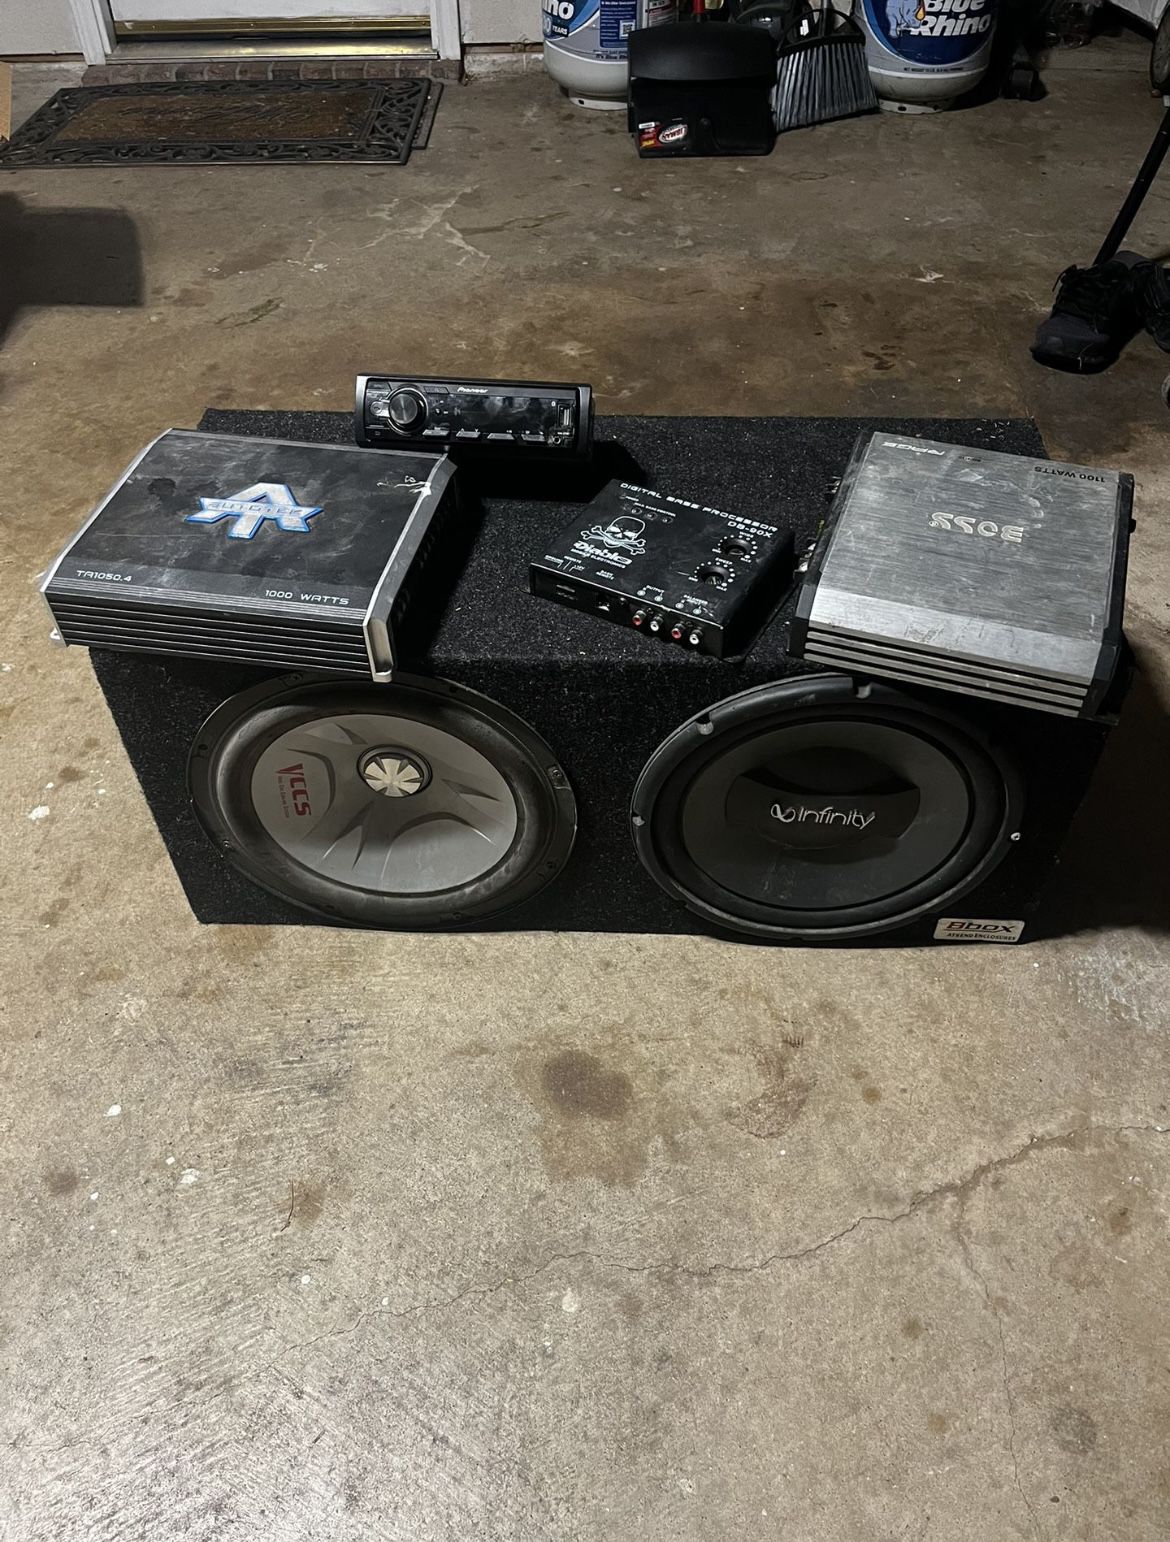 Subwoofers 12” 2 Amps Both 1000 watts With Radio And Bad Booster/equalizer